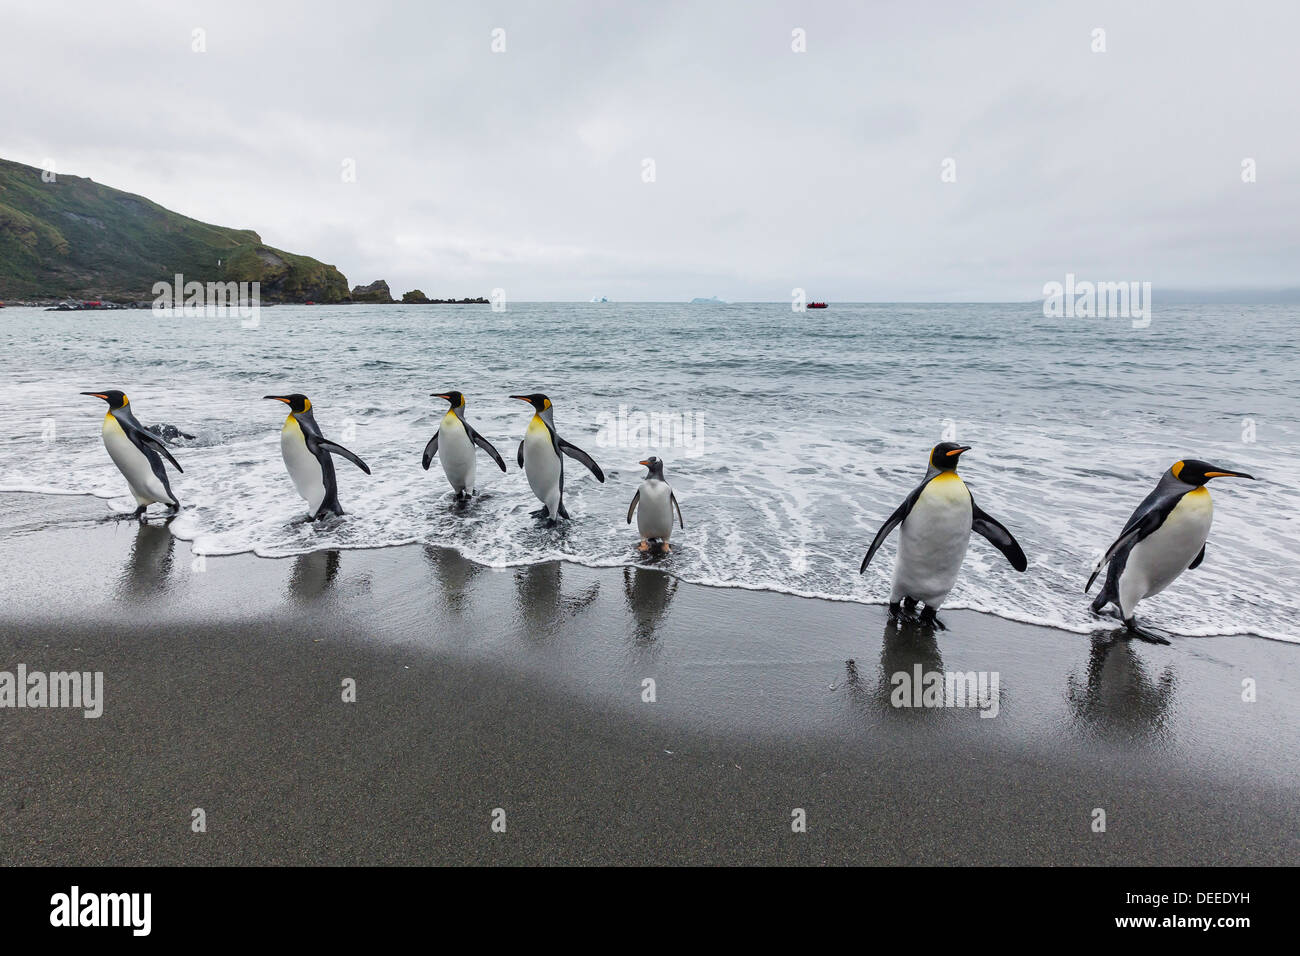 King penguins (Aptenodytes patagonicus) breeding and nesting colony at Gold Harbour, South Georgia, South Atlantic Ocean Stock Photo